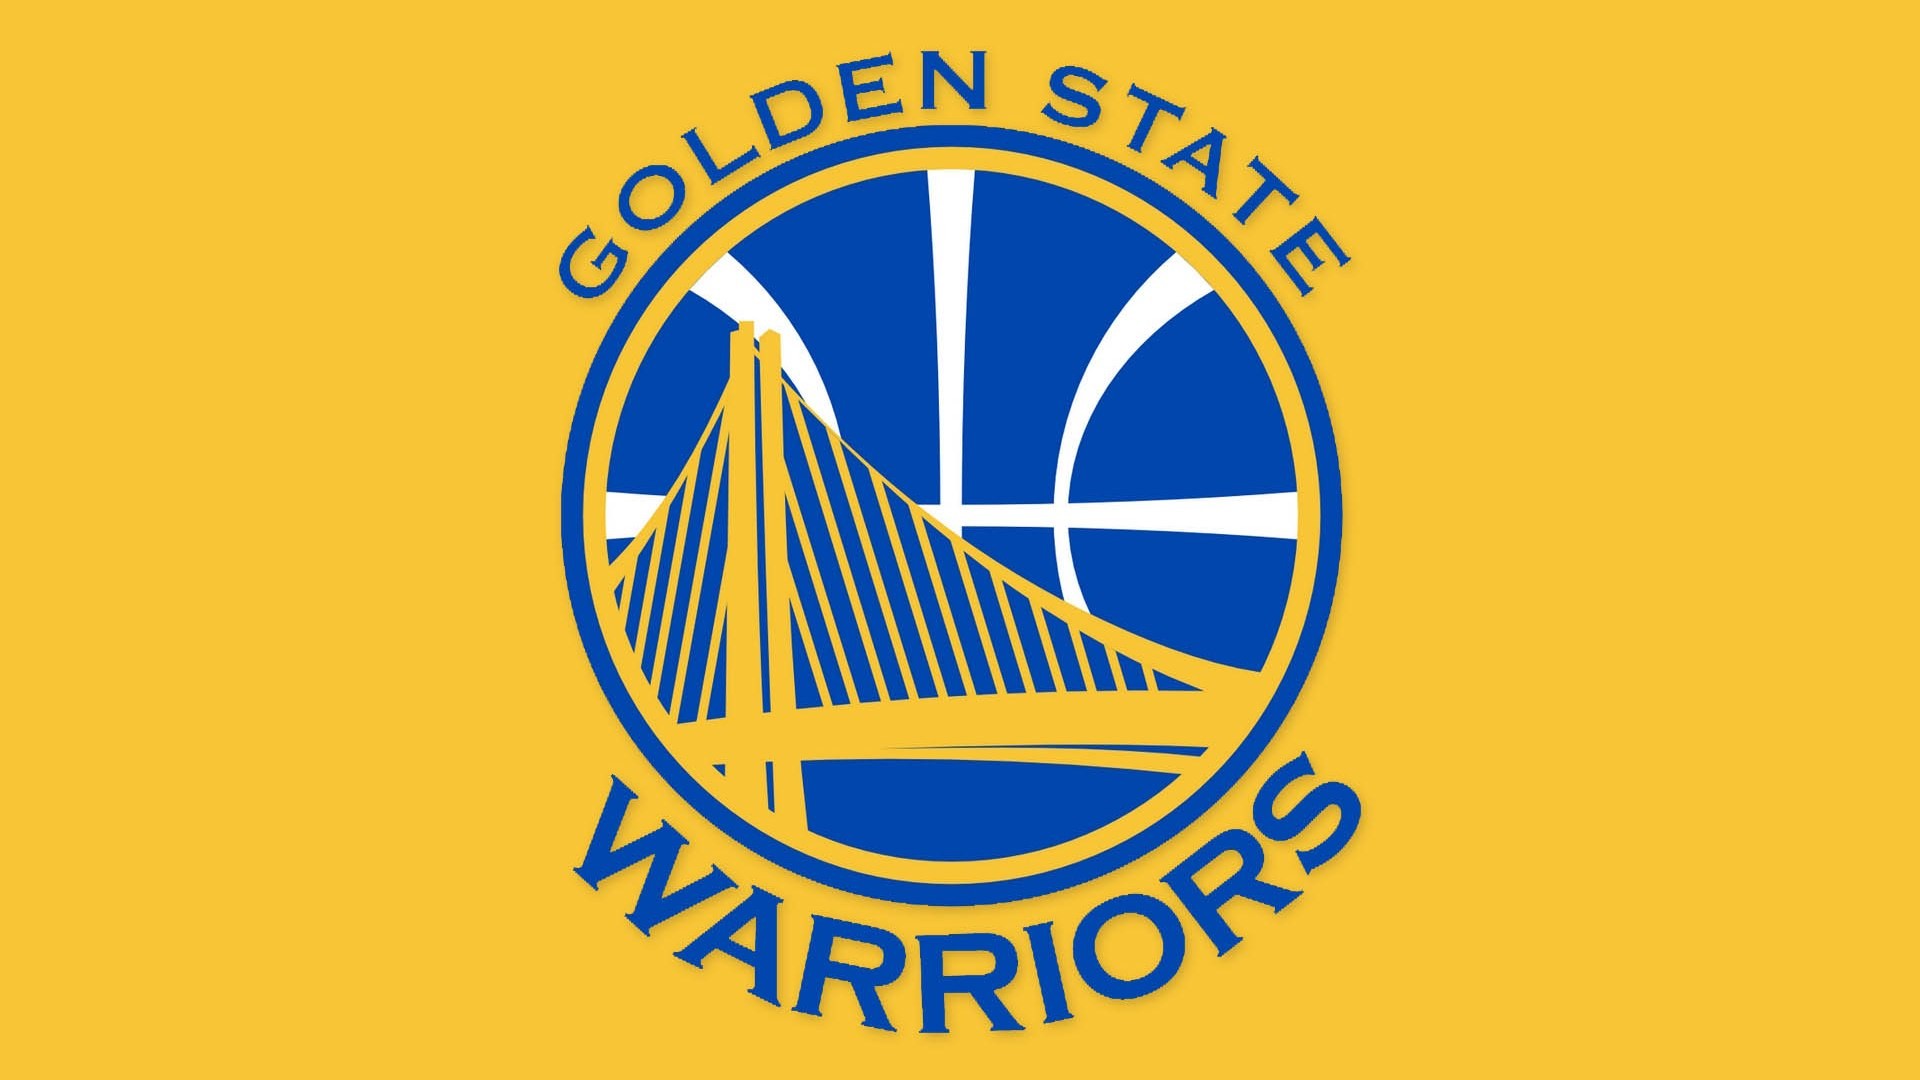 Golden State Warriors Logo Wallpaper with image dimensions 1920x1080 pixel. You can make this wallpaper for your Desktop Computer Backgrounds, Windows or Mac Screensavers, iPhone Lock screen, Tablet or Android and another Mobile Phone device